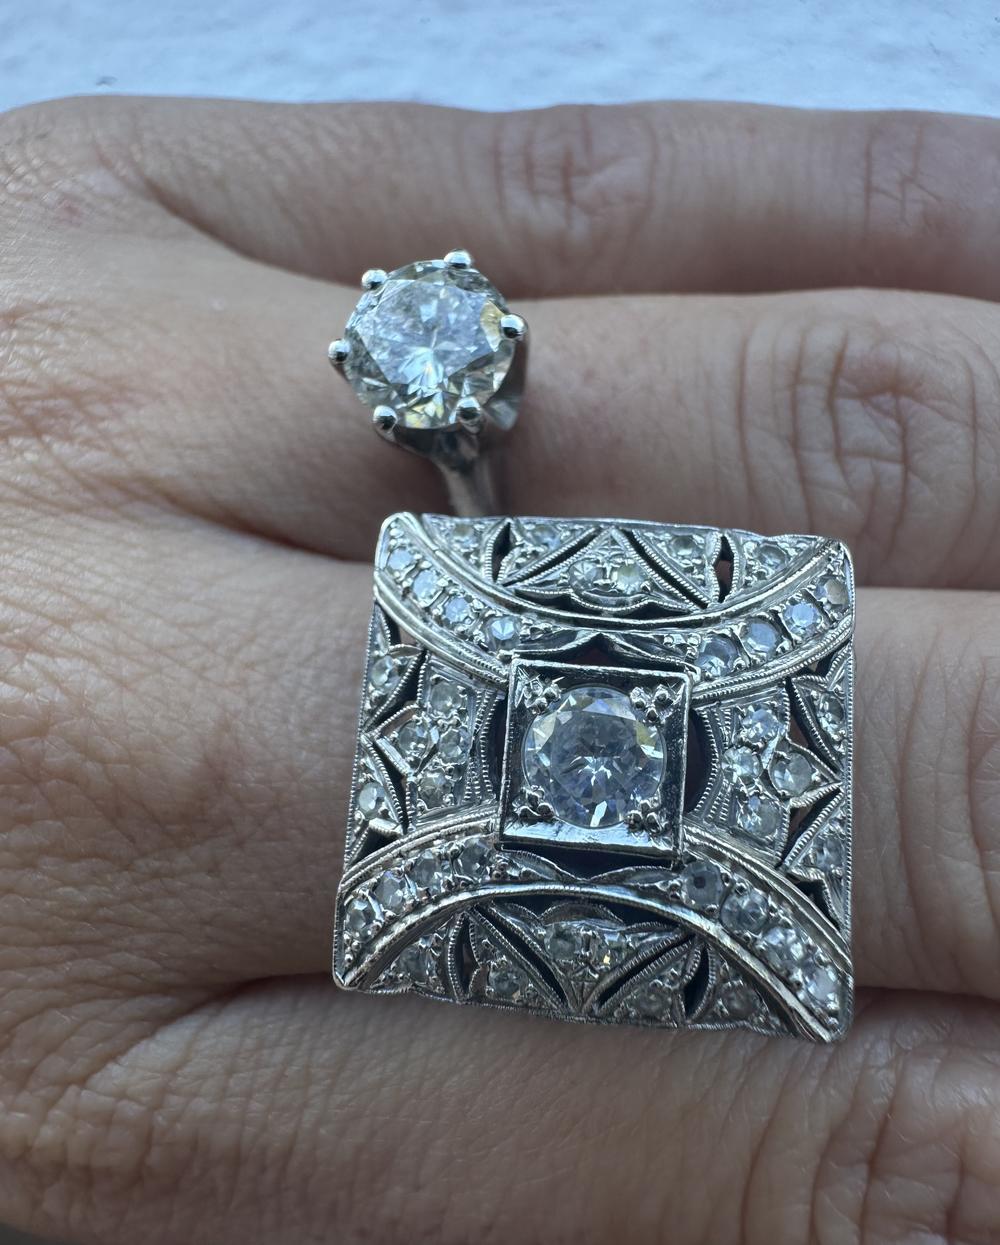 Both rings above are from Michelle Quirk's maternal grandmother. The single diamond ring was a final gift from her grandmother before she died in 2020.